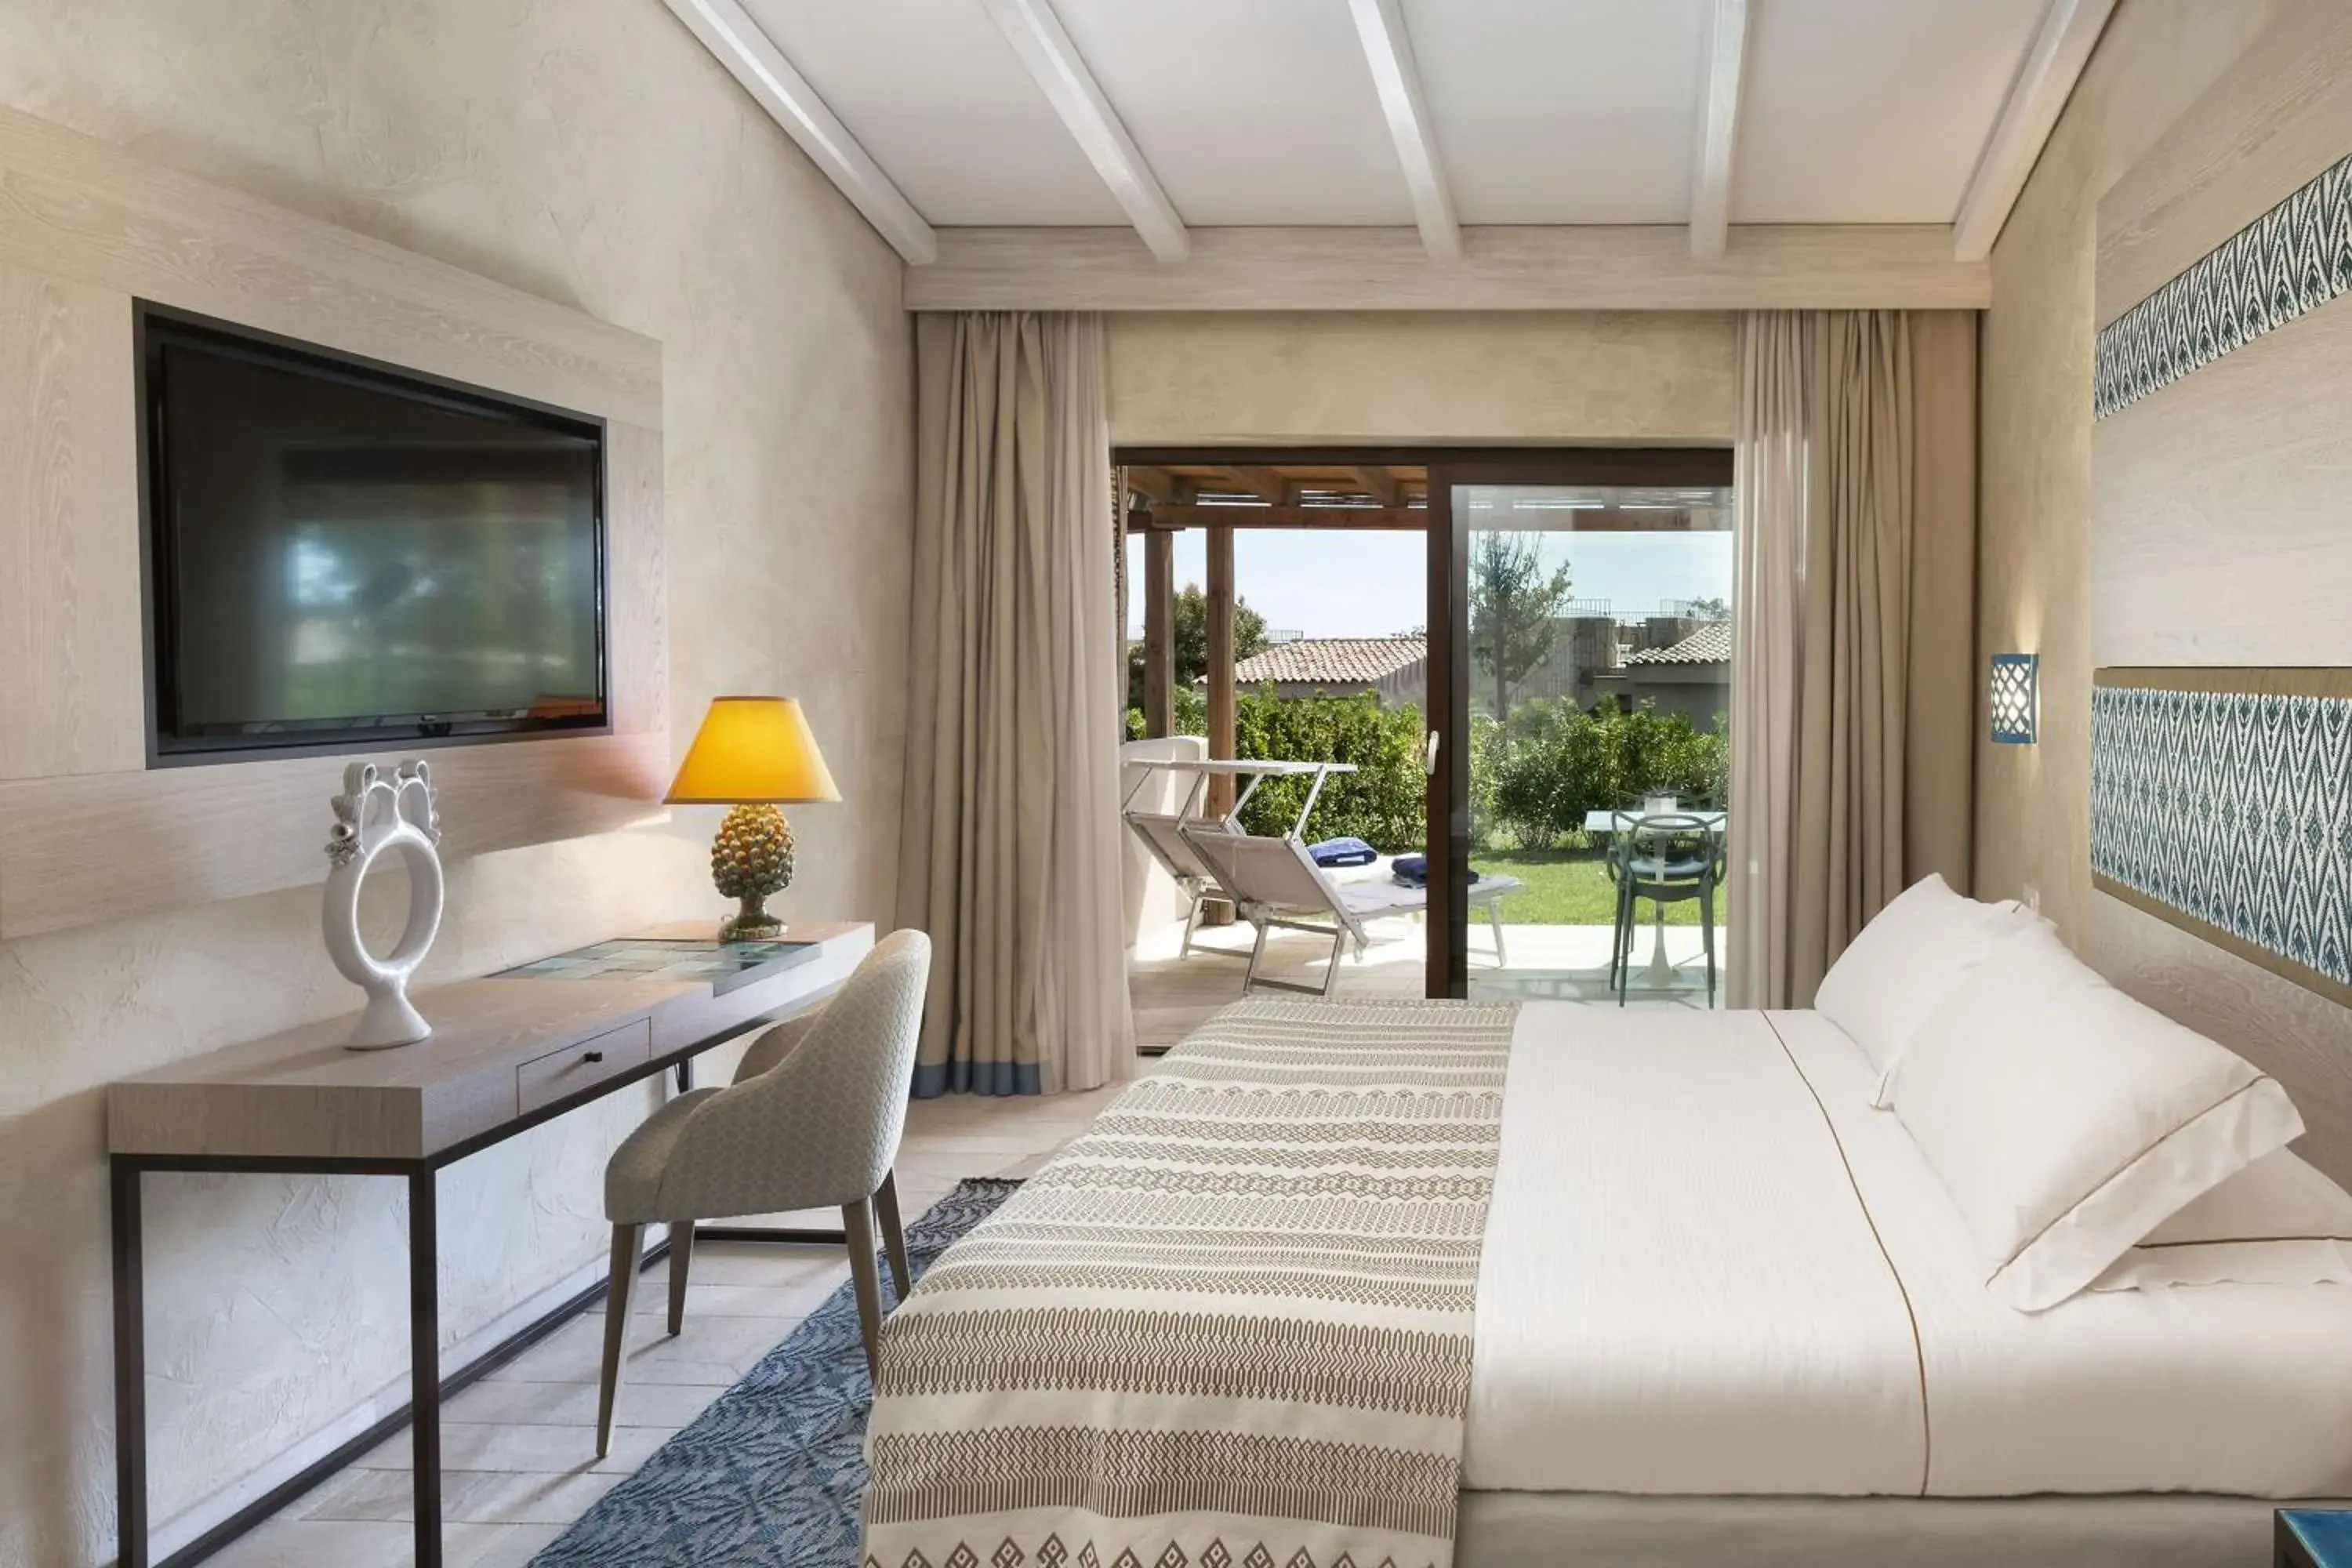 Bedroom in Baglioni Resort Sardinia - The Leading Hotels of the World